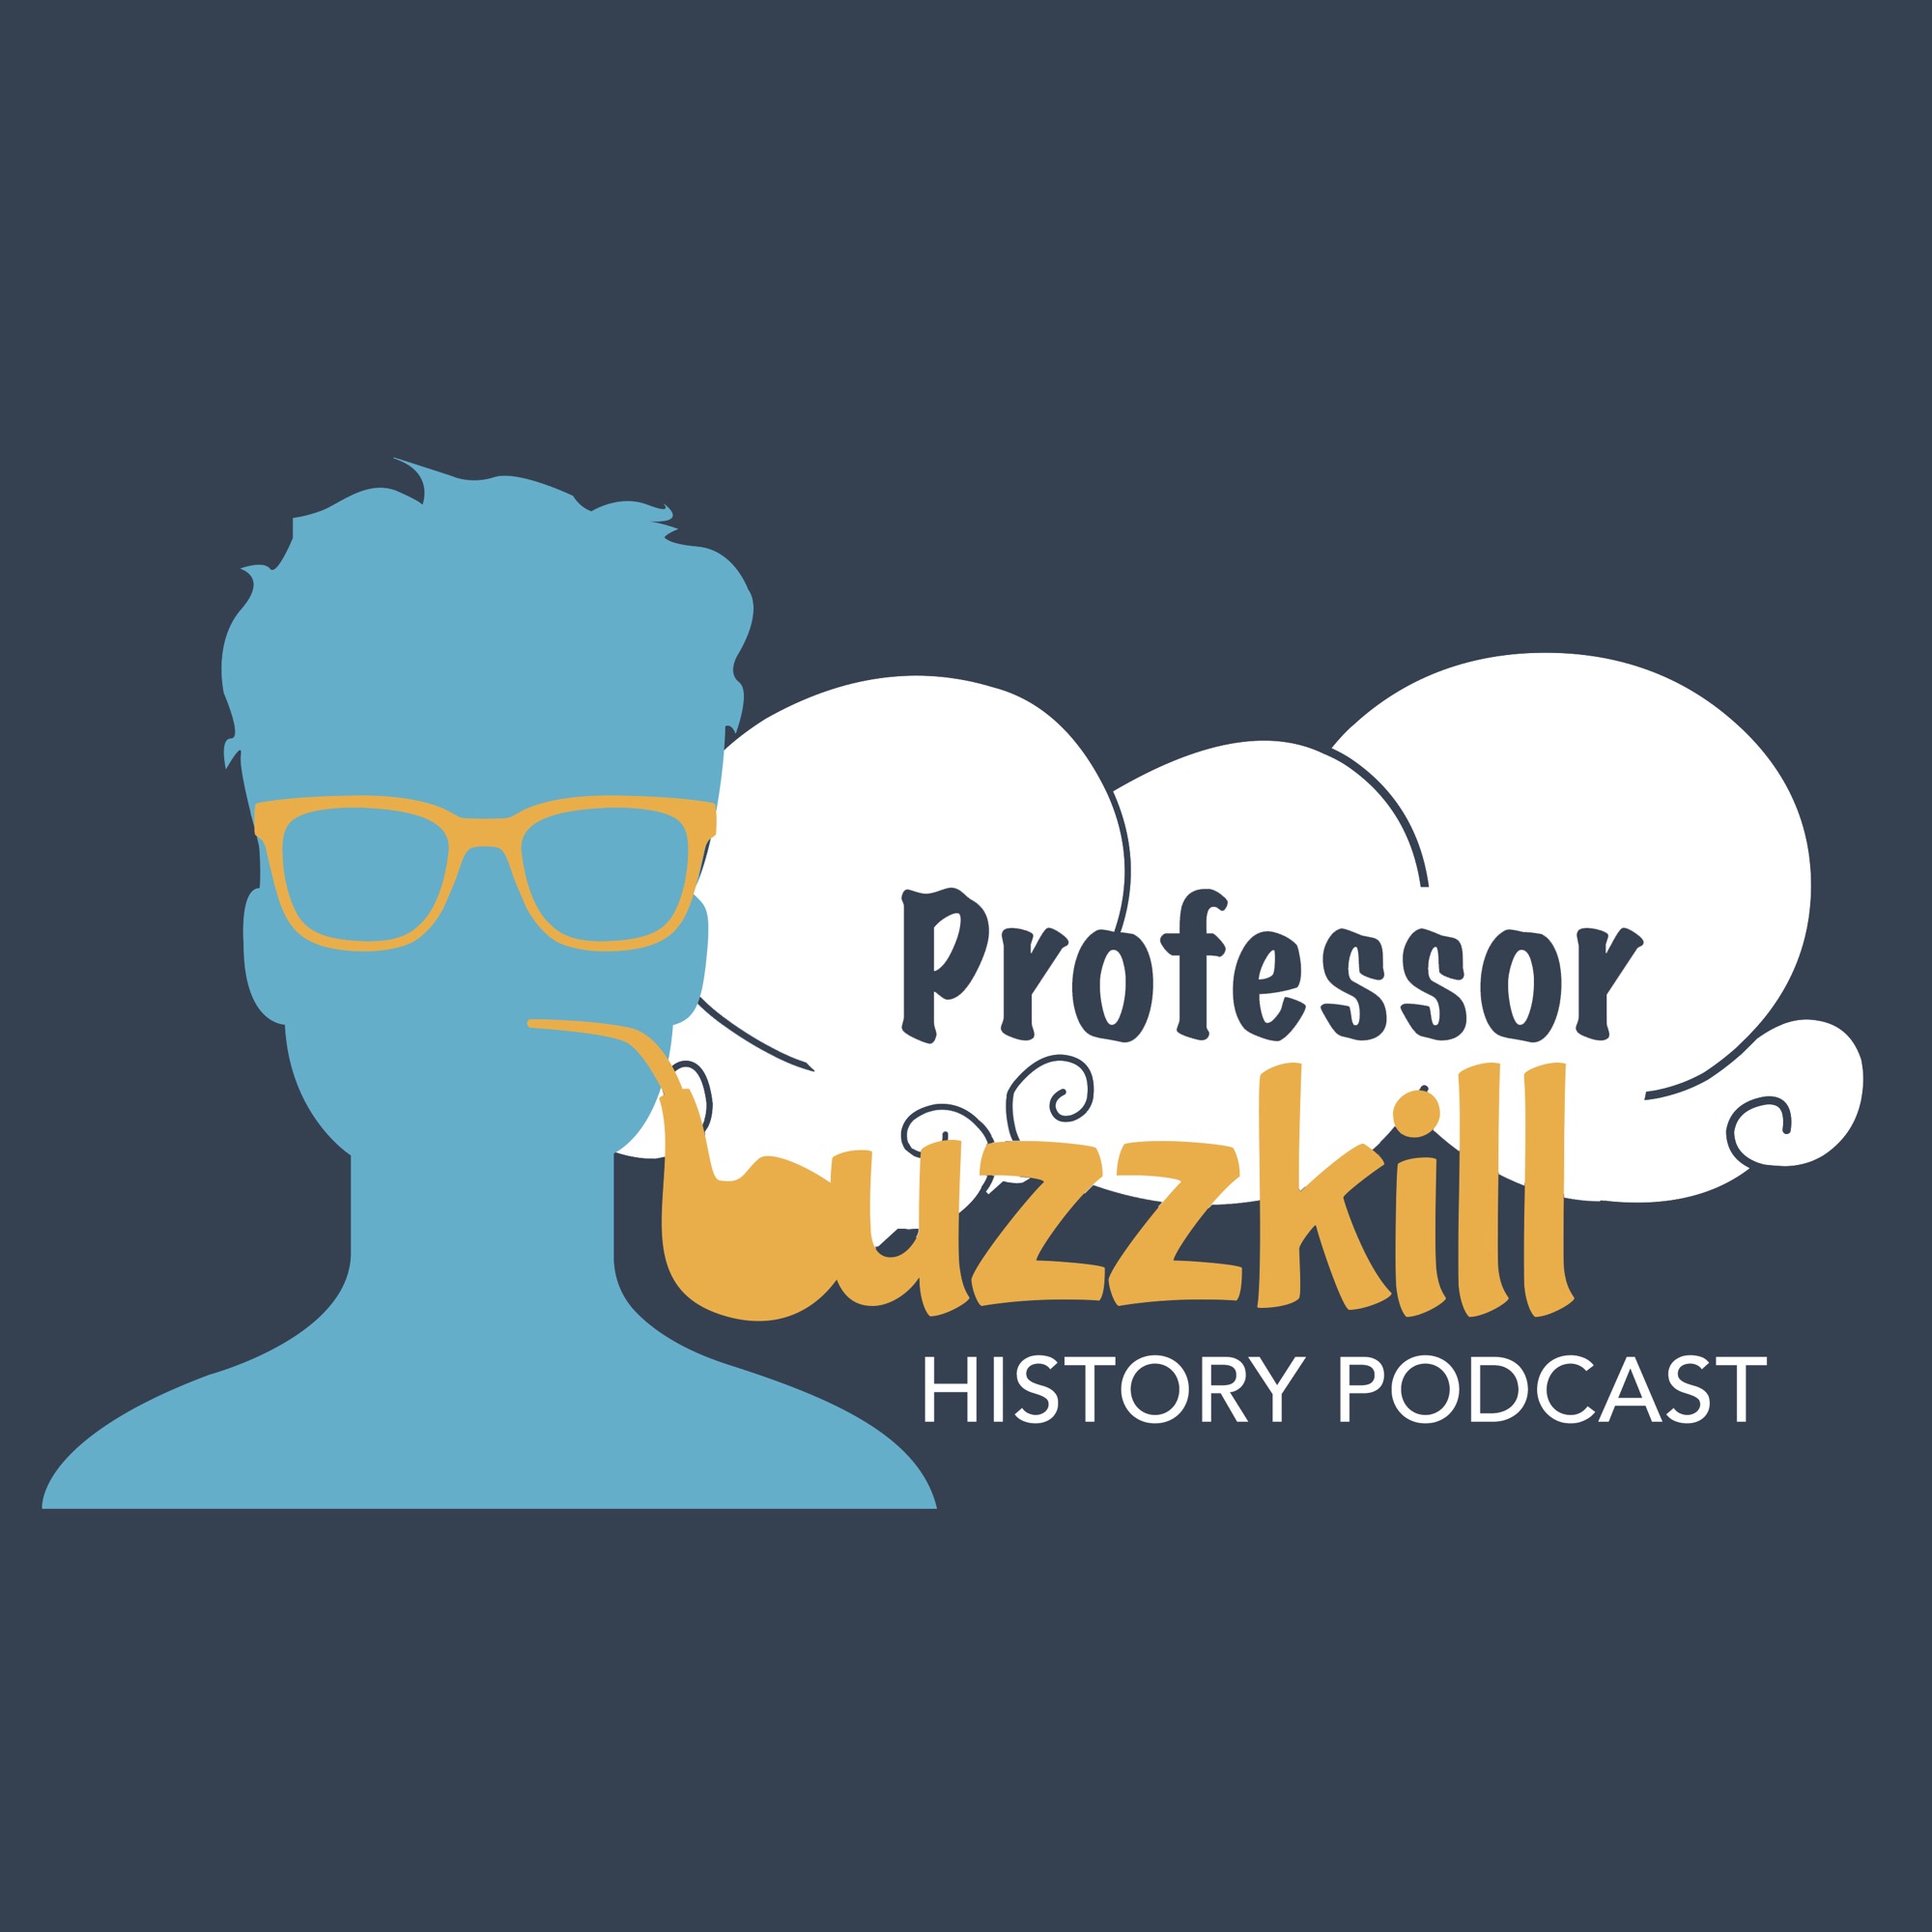 The Myth Of Colorblind Christians Professor Buzzkill History Podcast